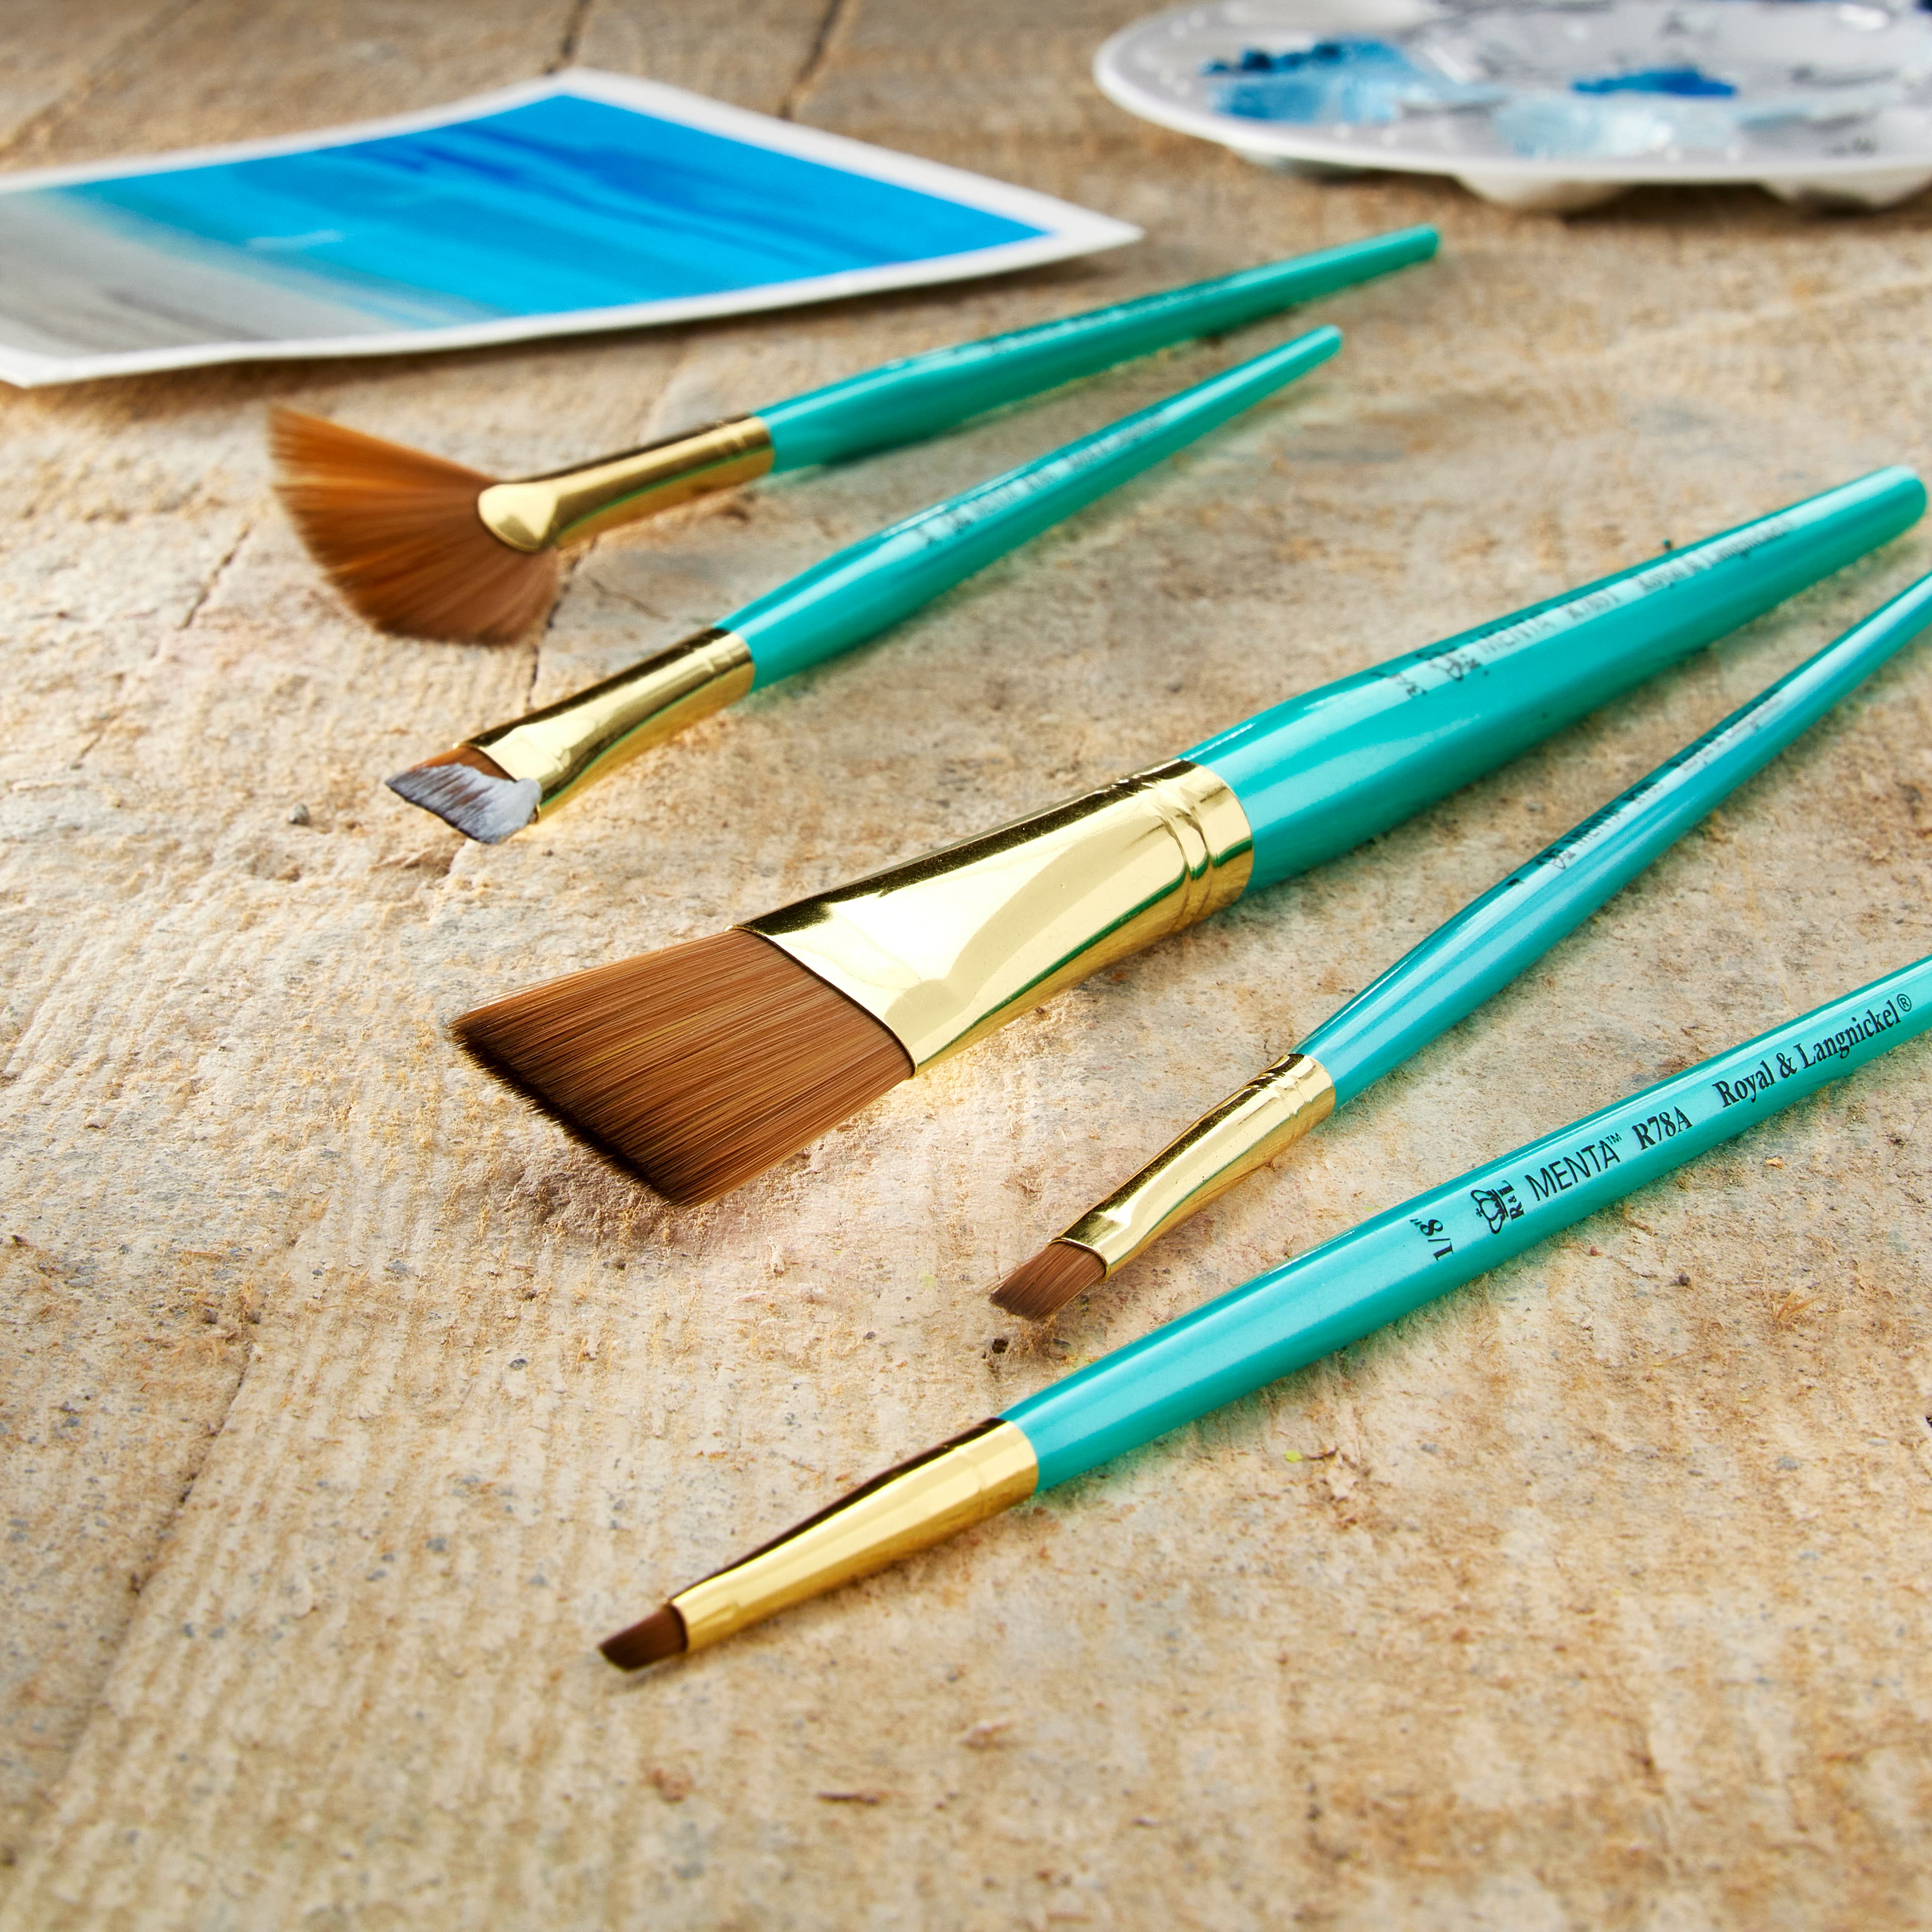 12 Packs: 5 ct. (60 total) Menta&#x2122; Synthetic Acrylic Variety Brush Set